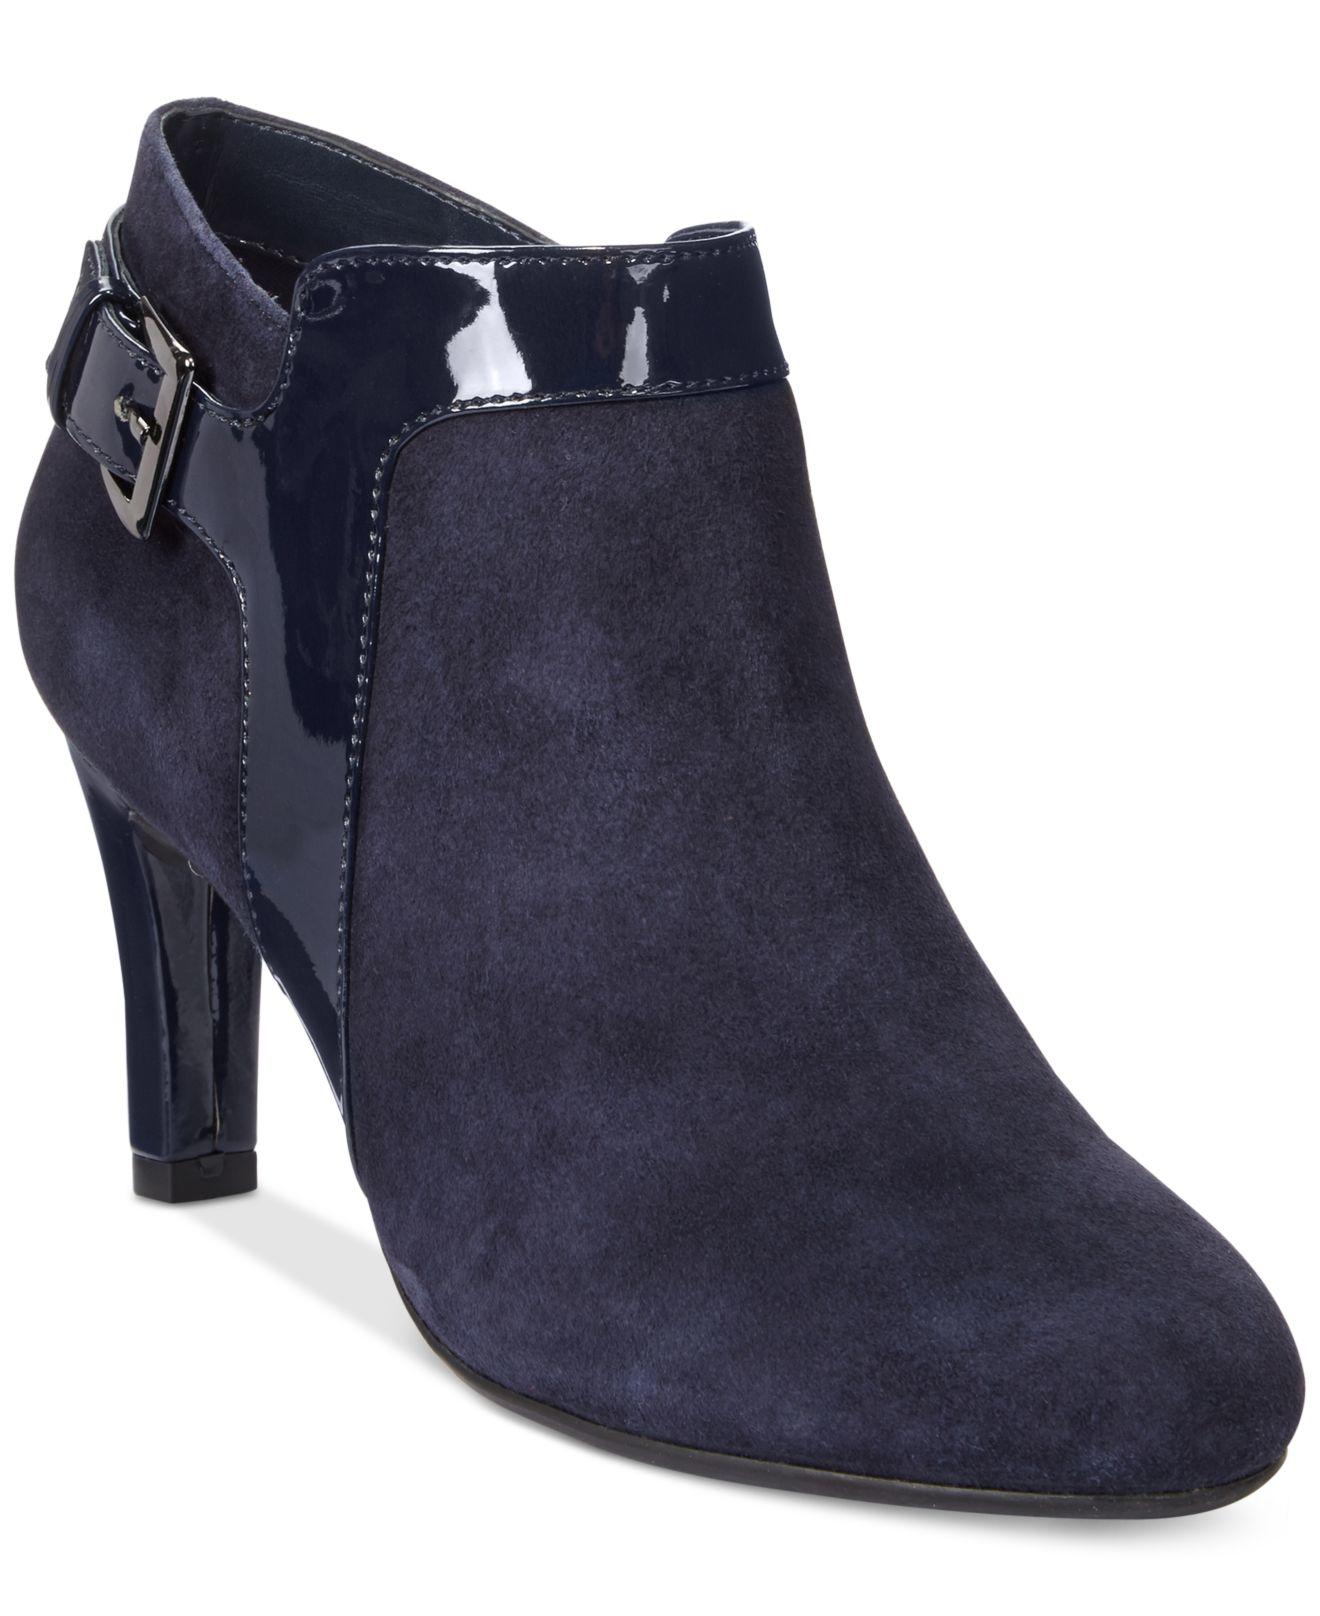 Bandolino Loman Dress Booties in Navy Suede (Blue) - Lyst